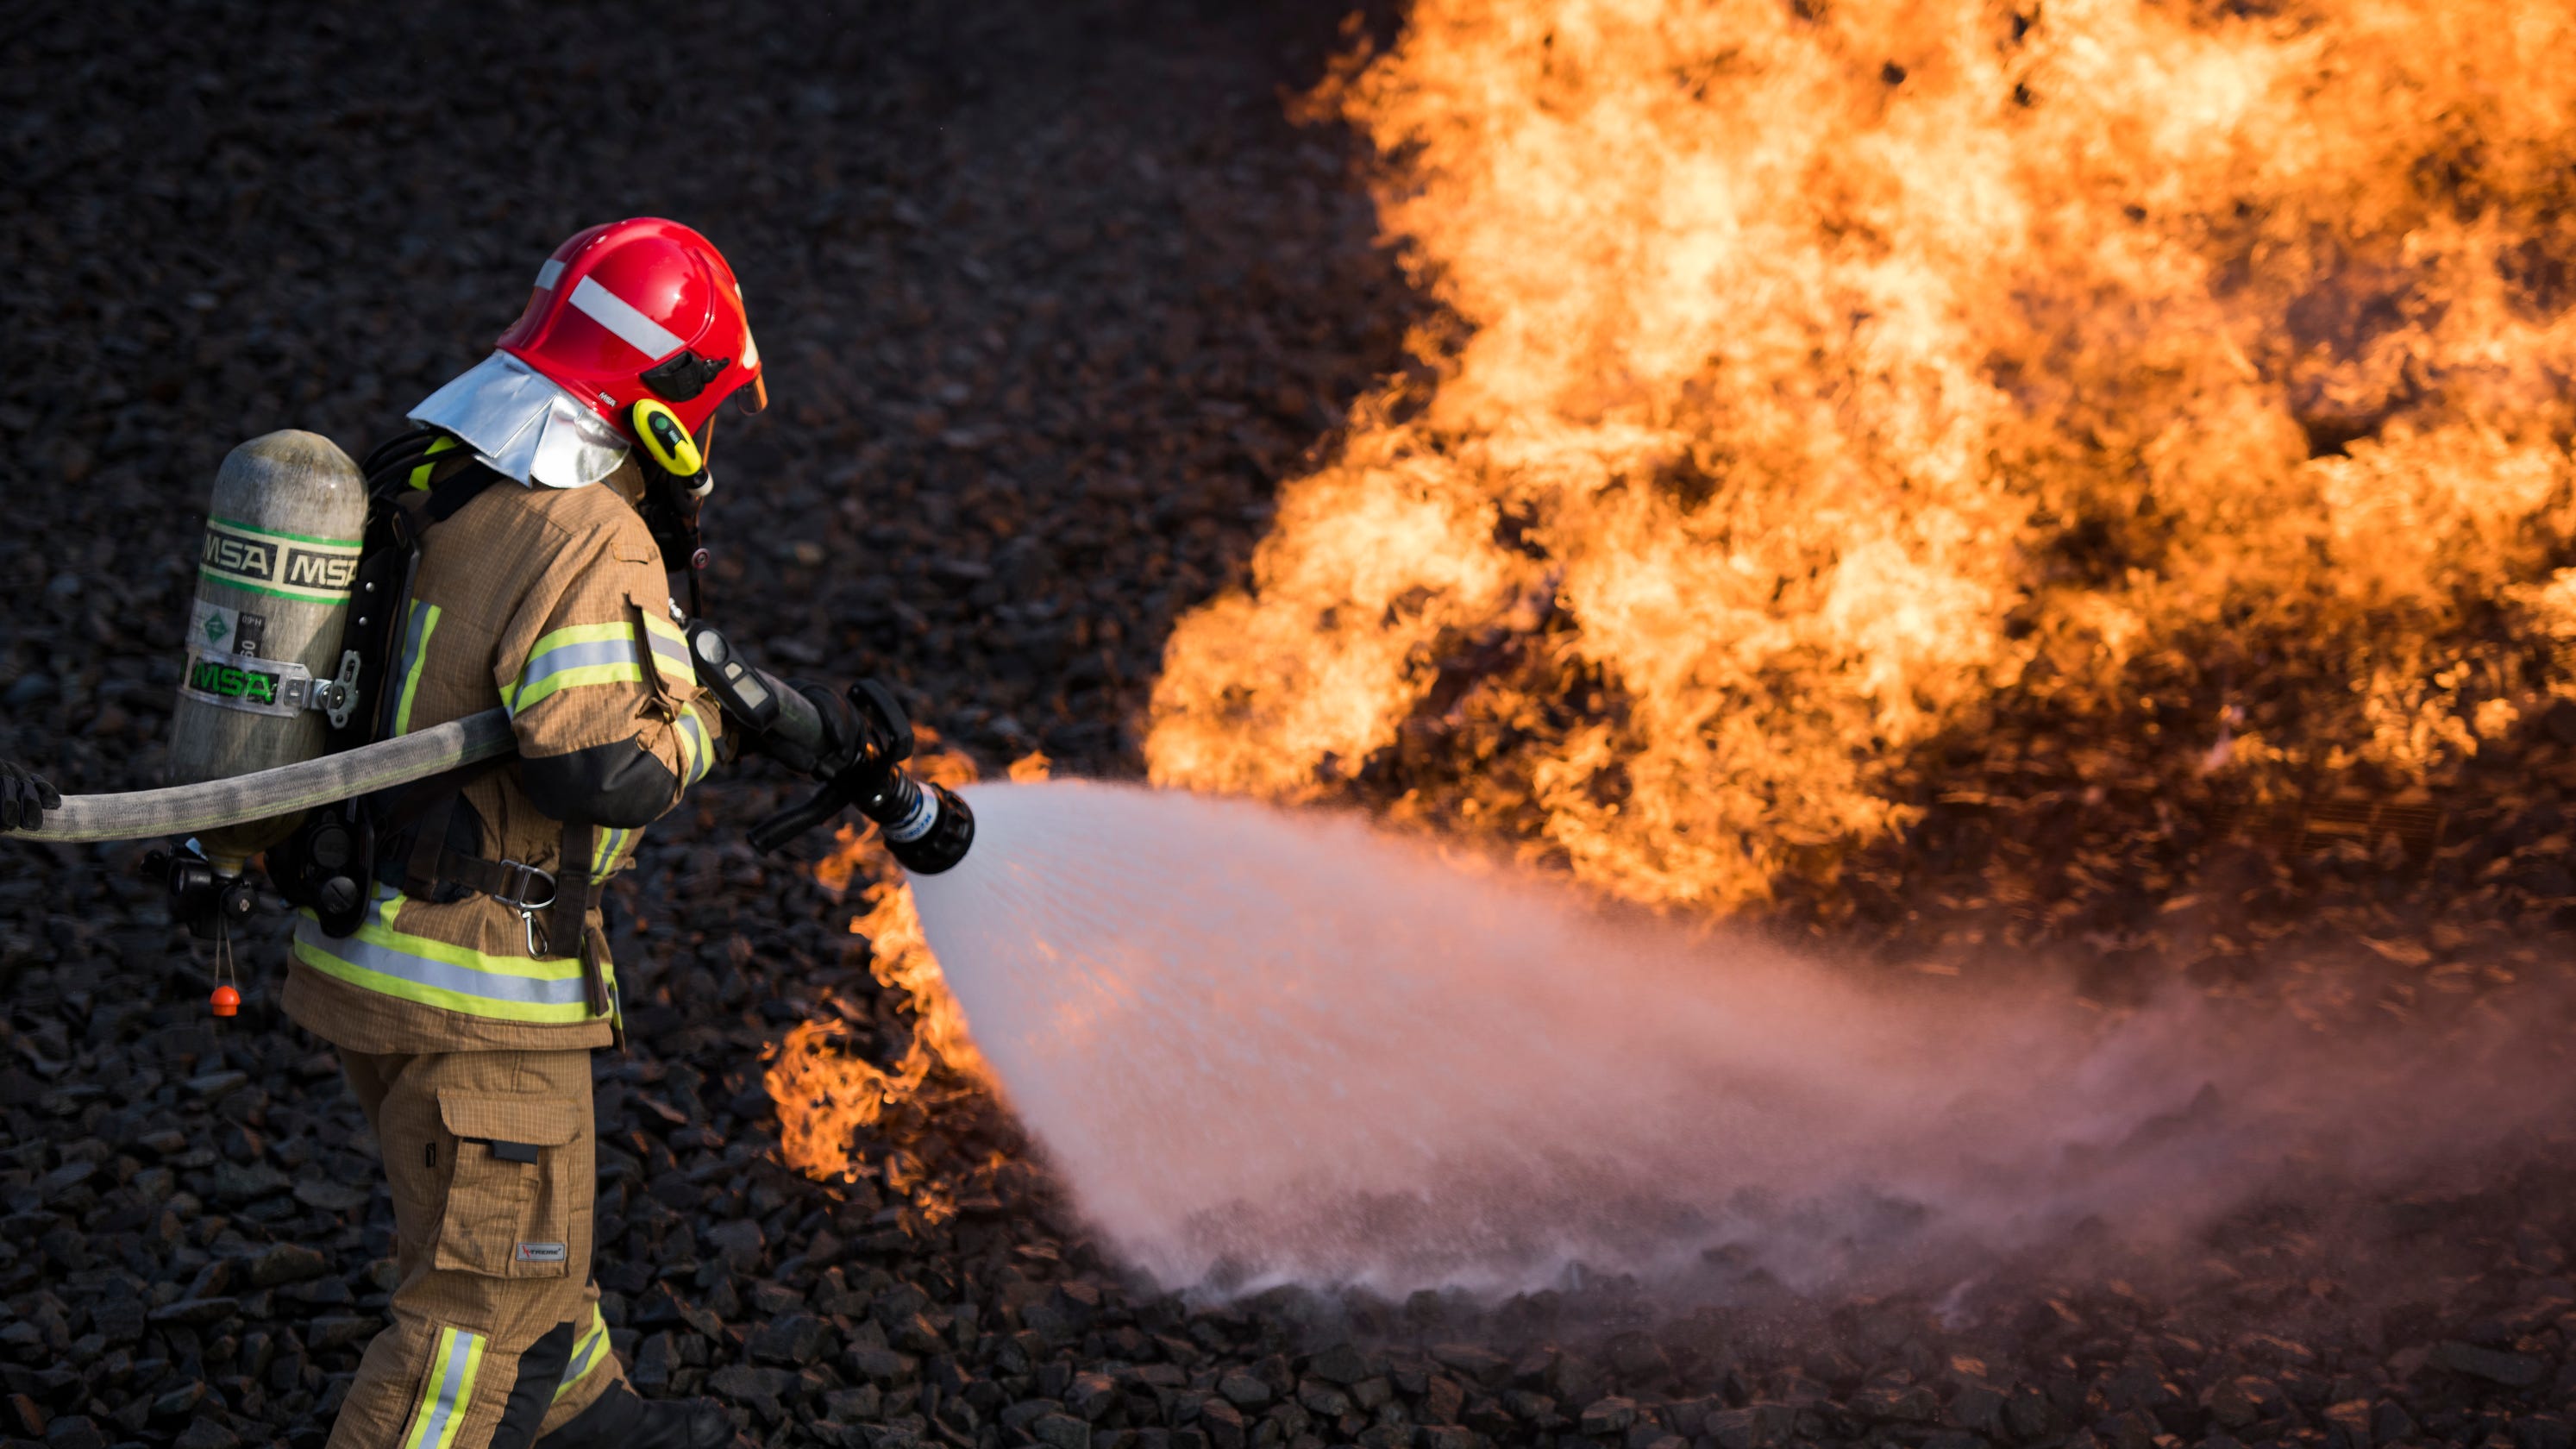 U.S. and NATO firefighters forge through the flames